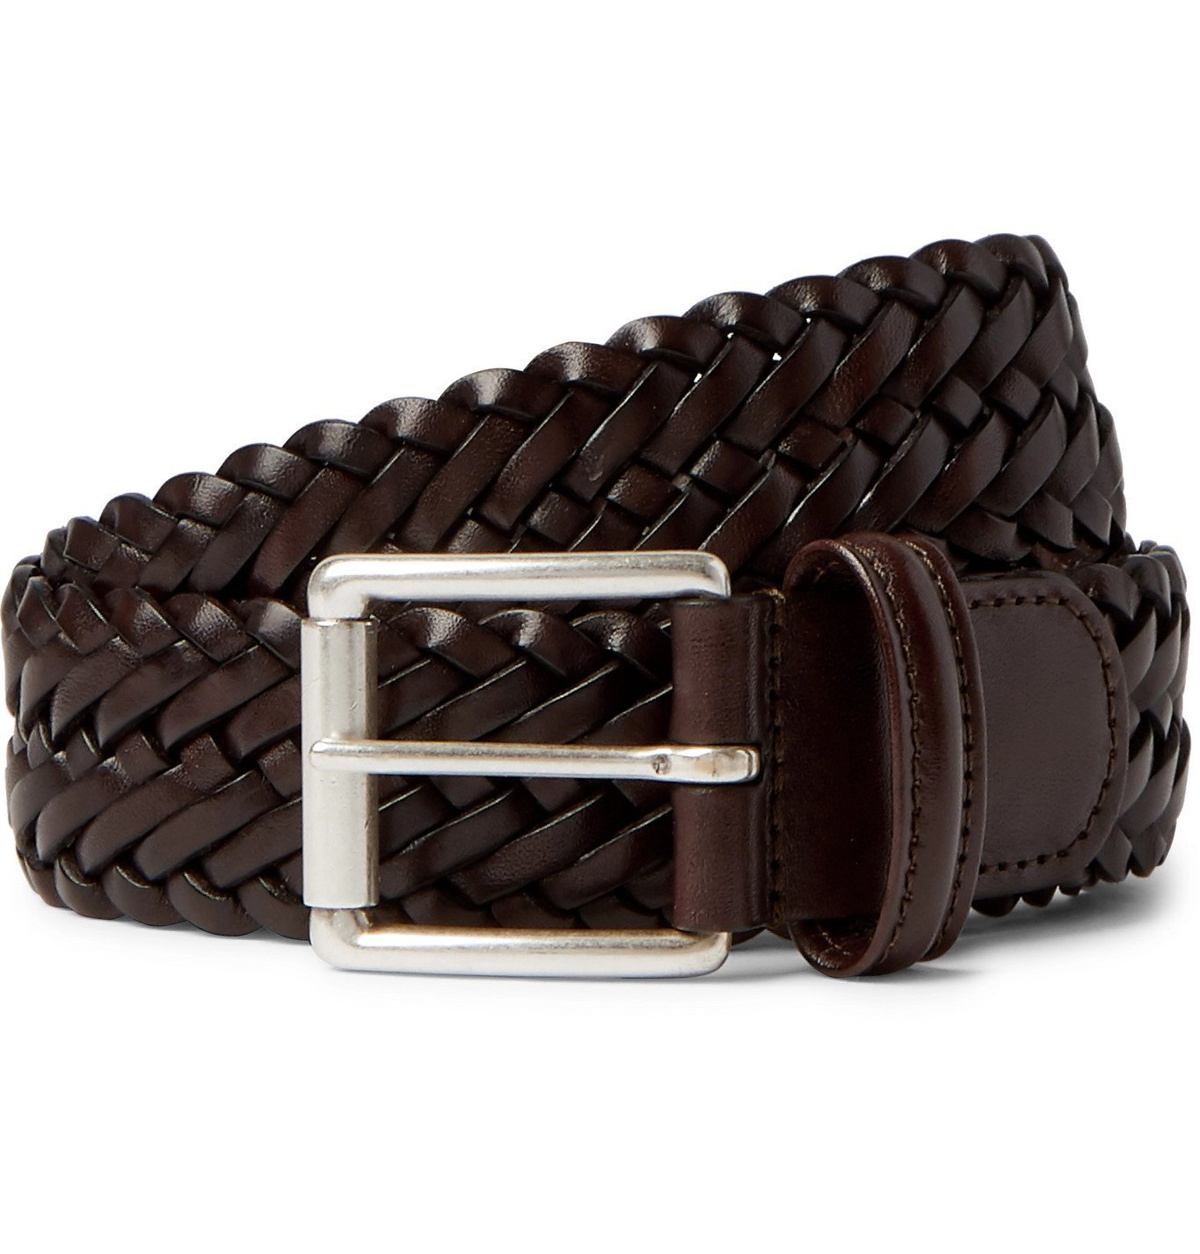 Anderson's - 3.5cm Brown Woven Leather Belt - Brown Anderson's